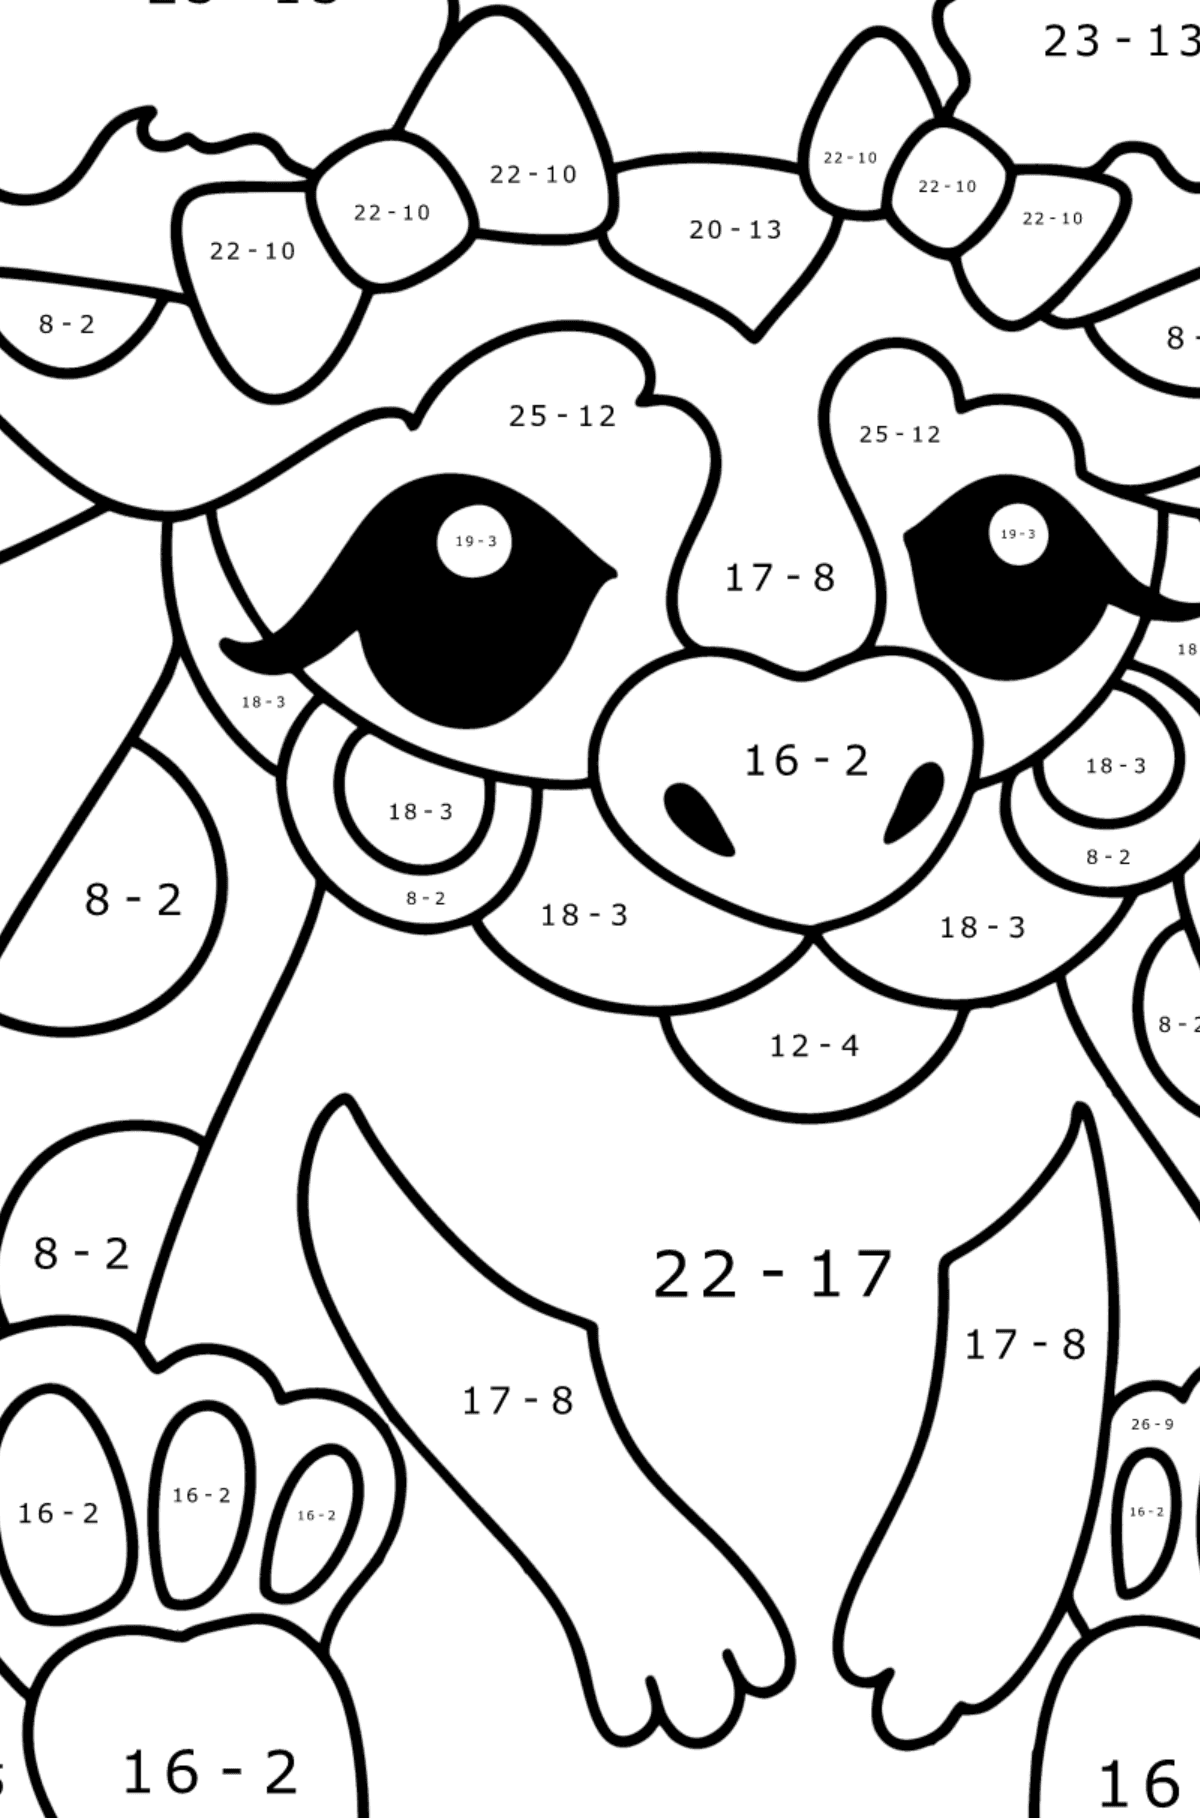 Dragon girl coloring page - Math Coloring - Subtraction for Kids